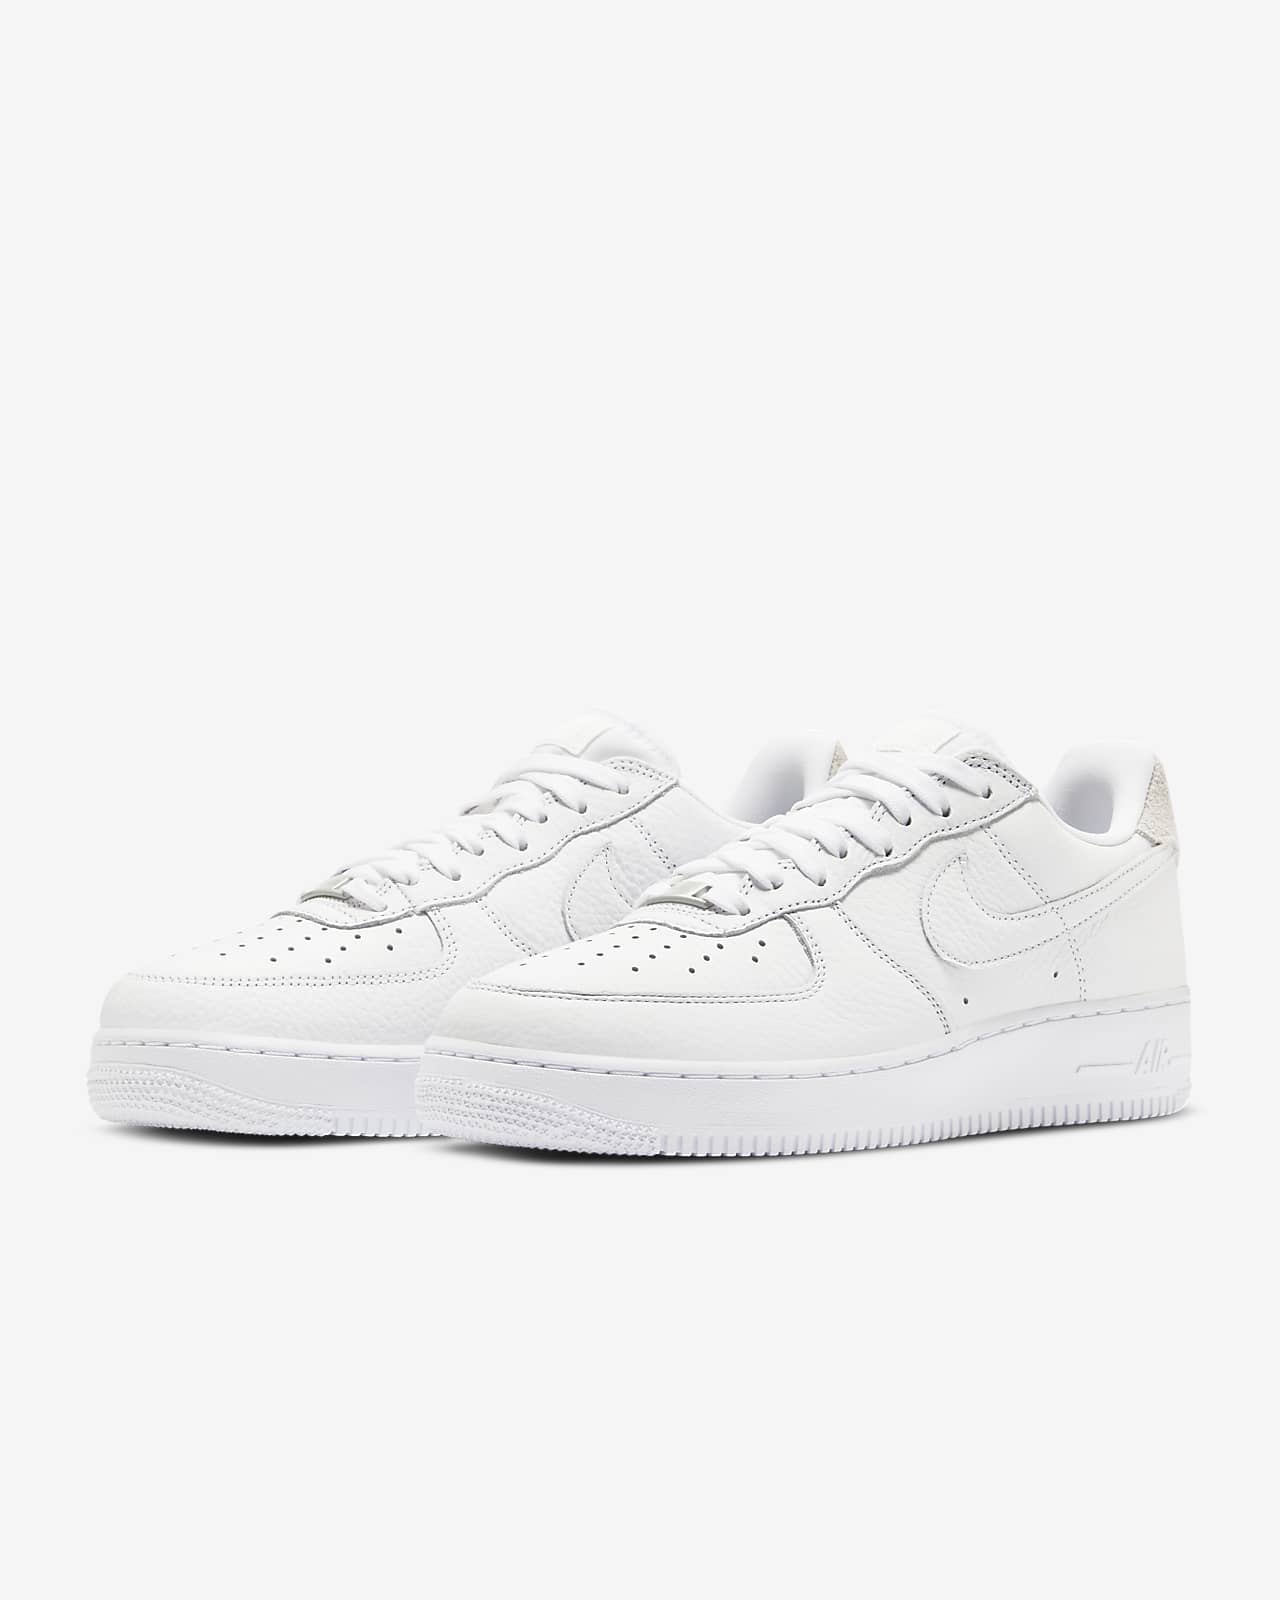 Nike Air Force 1 '07 Craft Men's Shoes. Nike.com مراوح